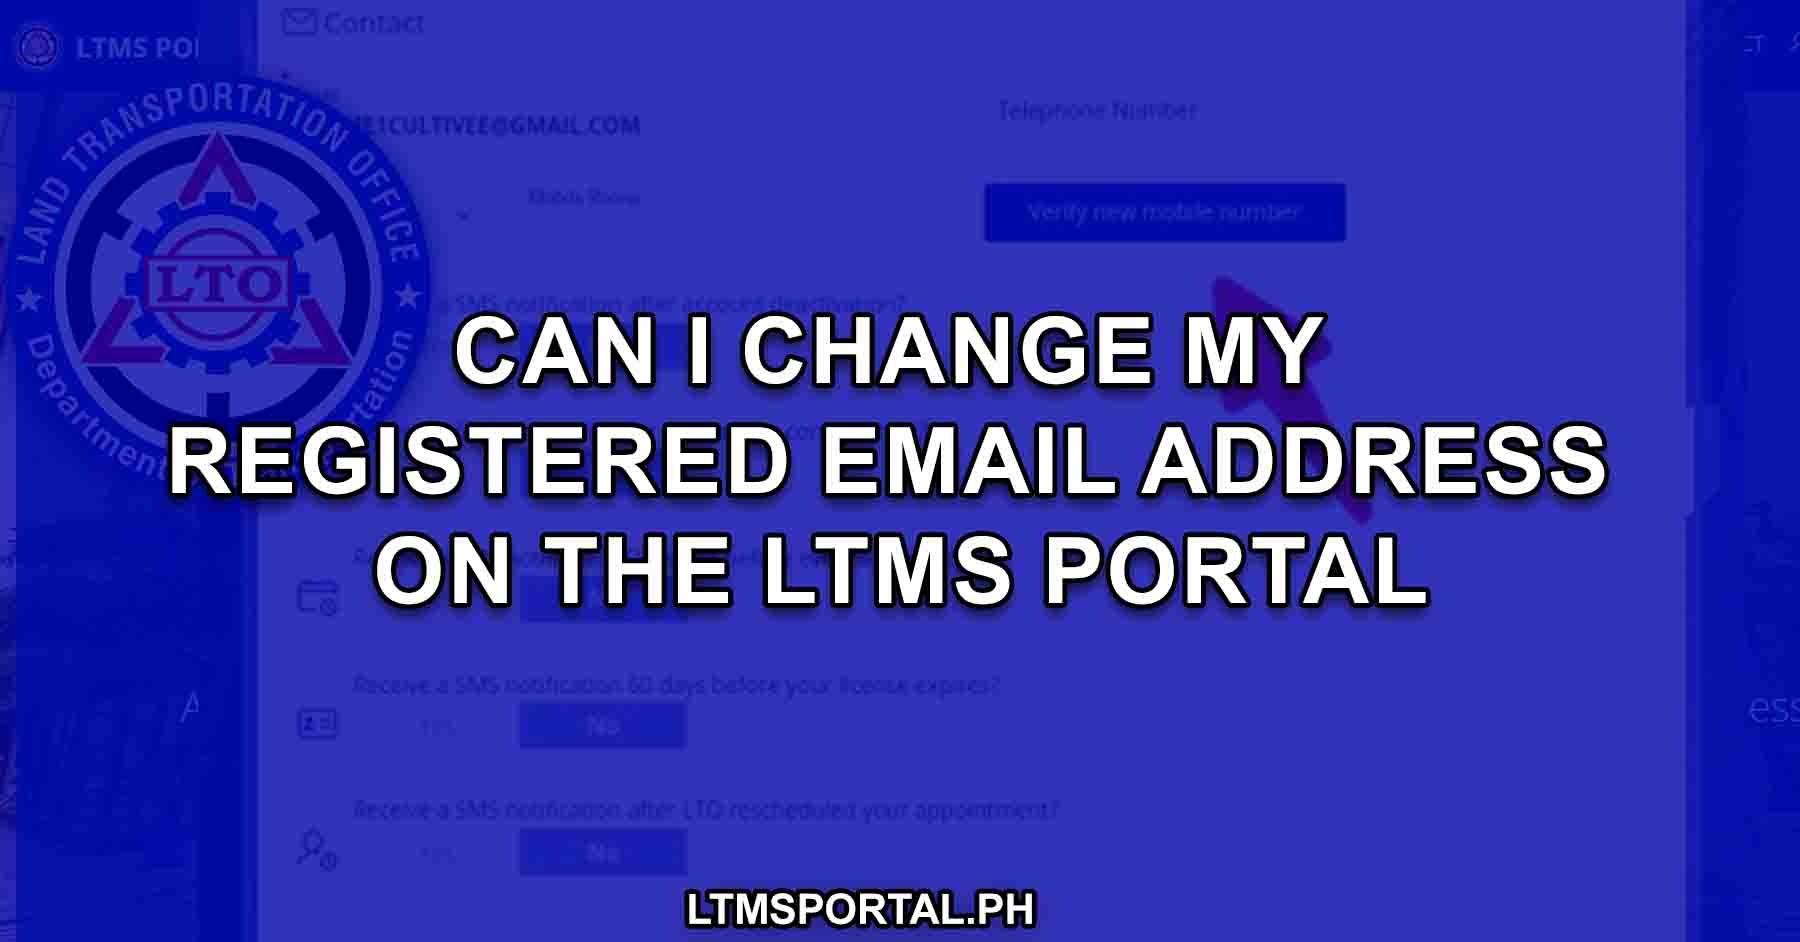 can i change registered email address in ltms portal account